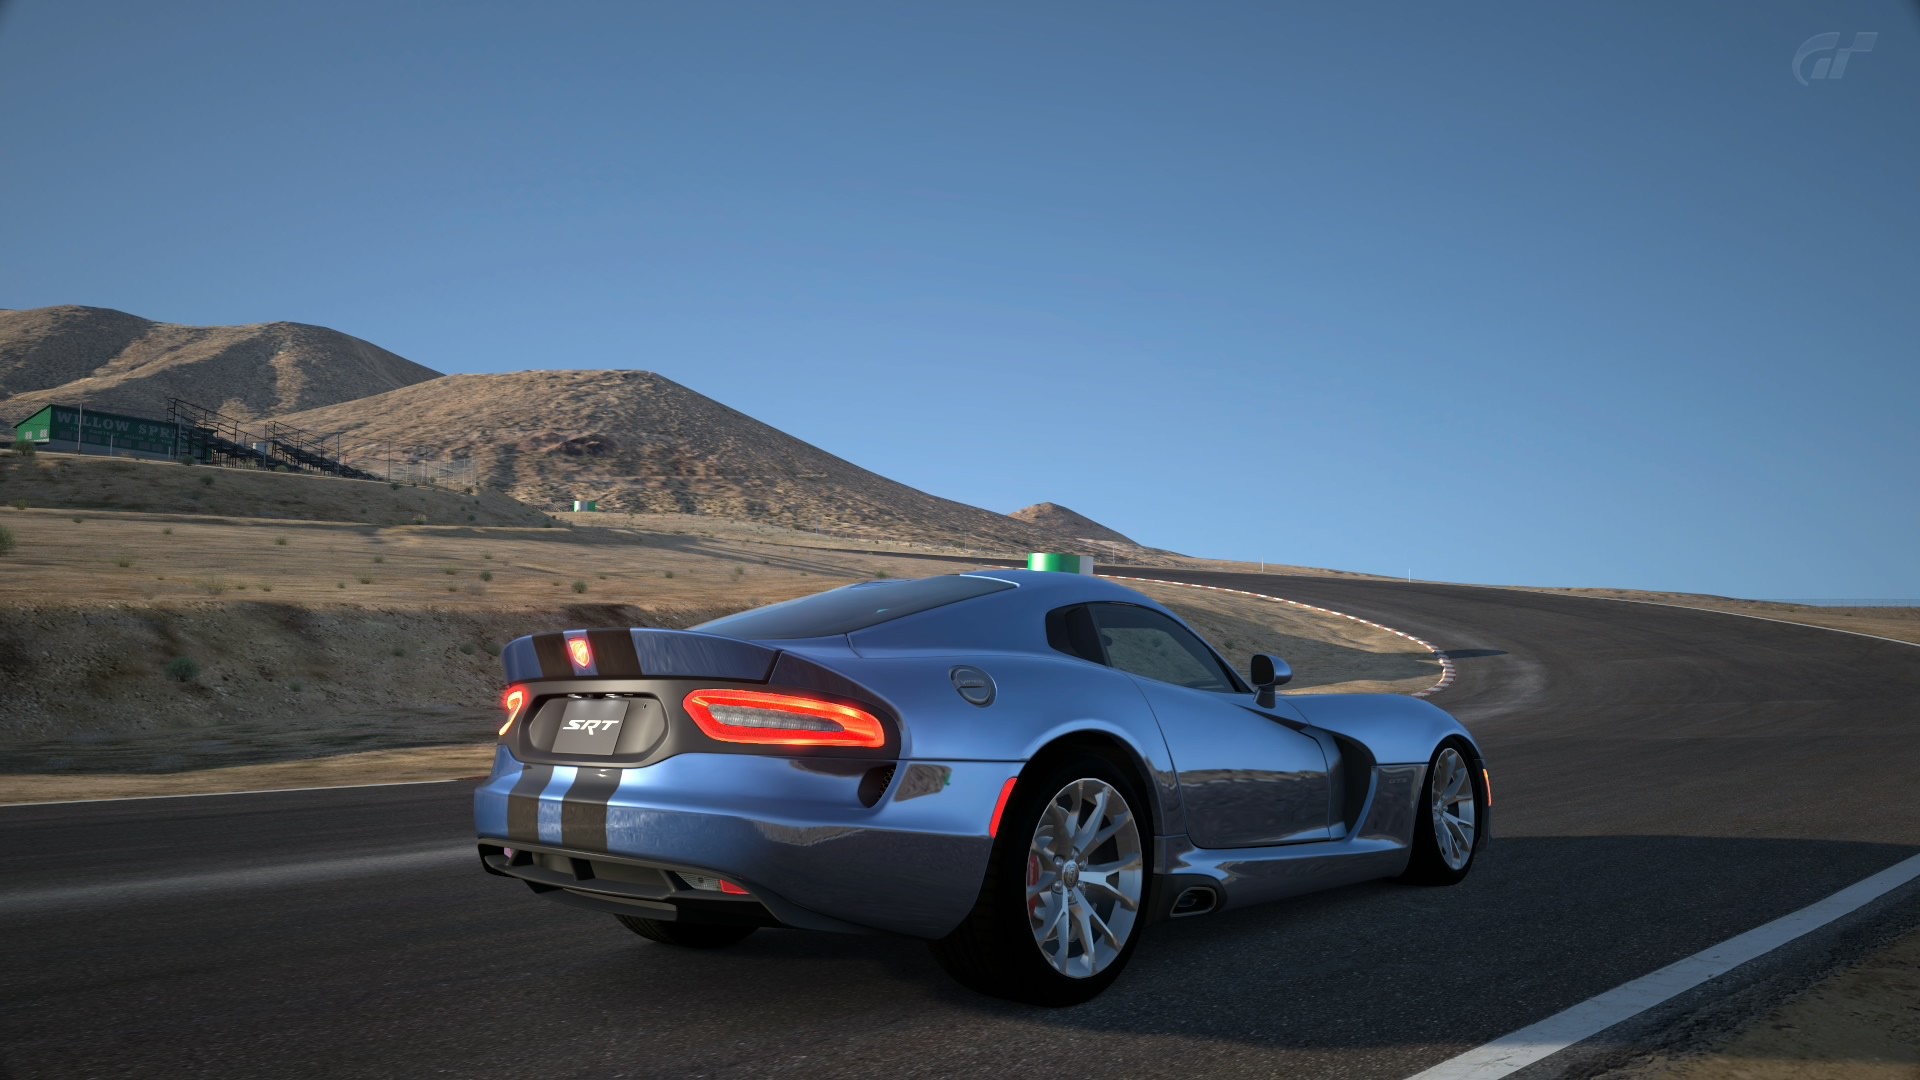 06 Willow Springs - Dodge Viper  [Fotos] Willow21